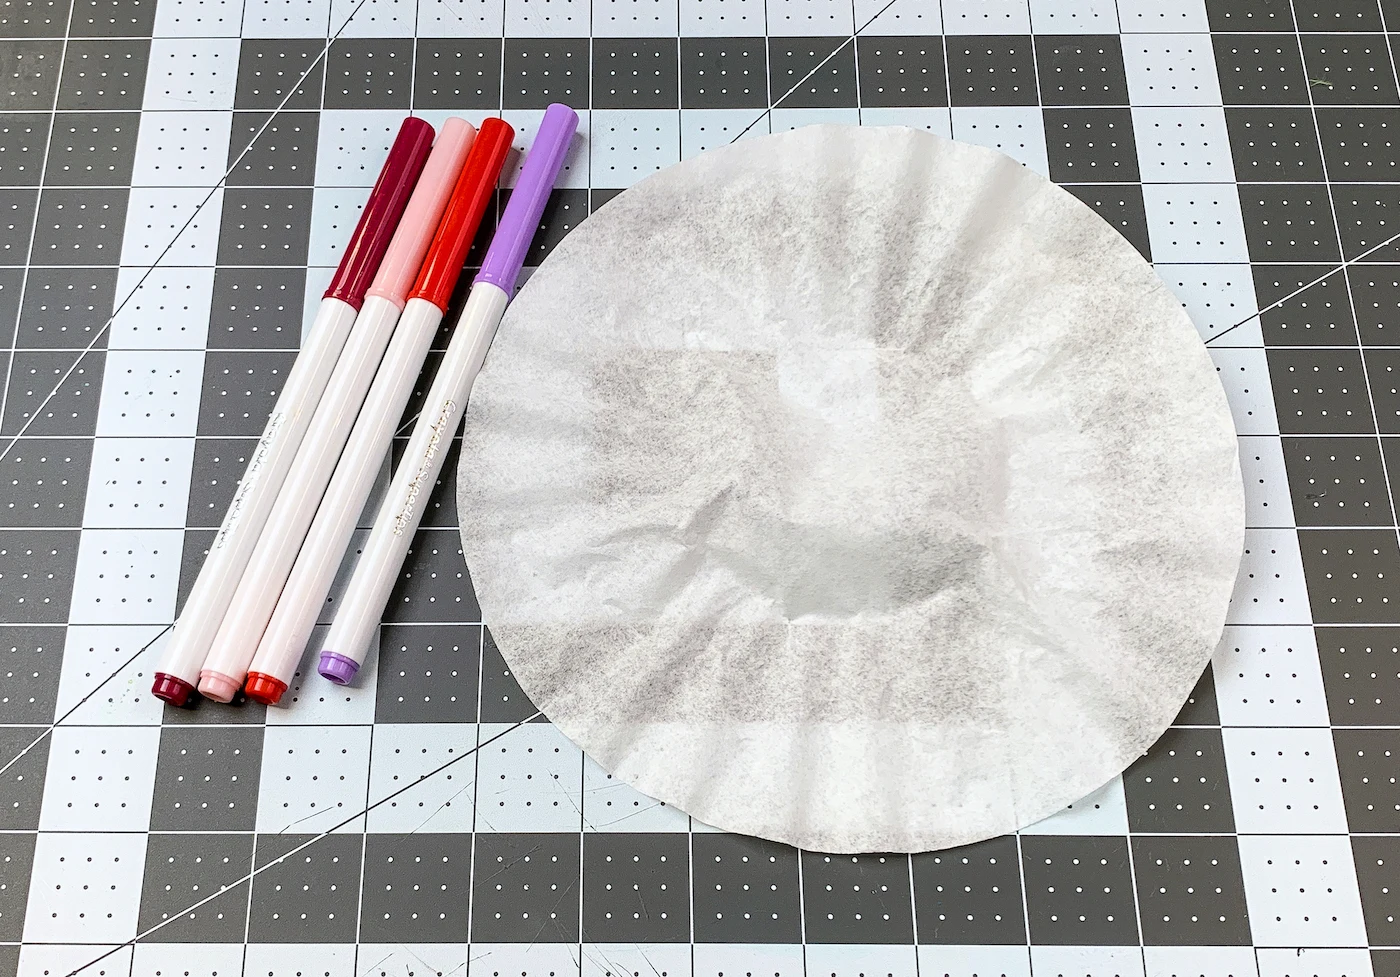 Coffee filter with red, pink, and purple markers